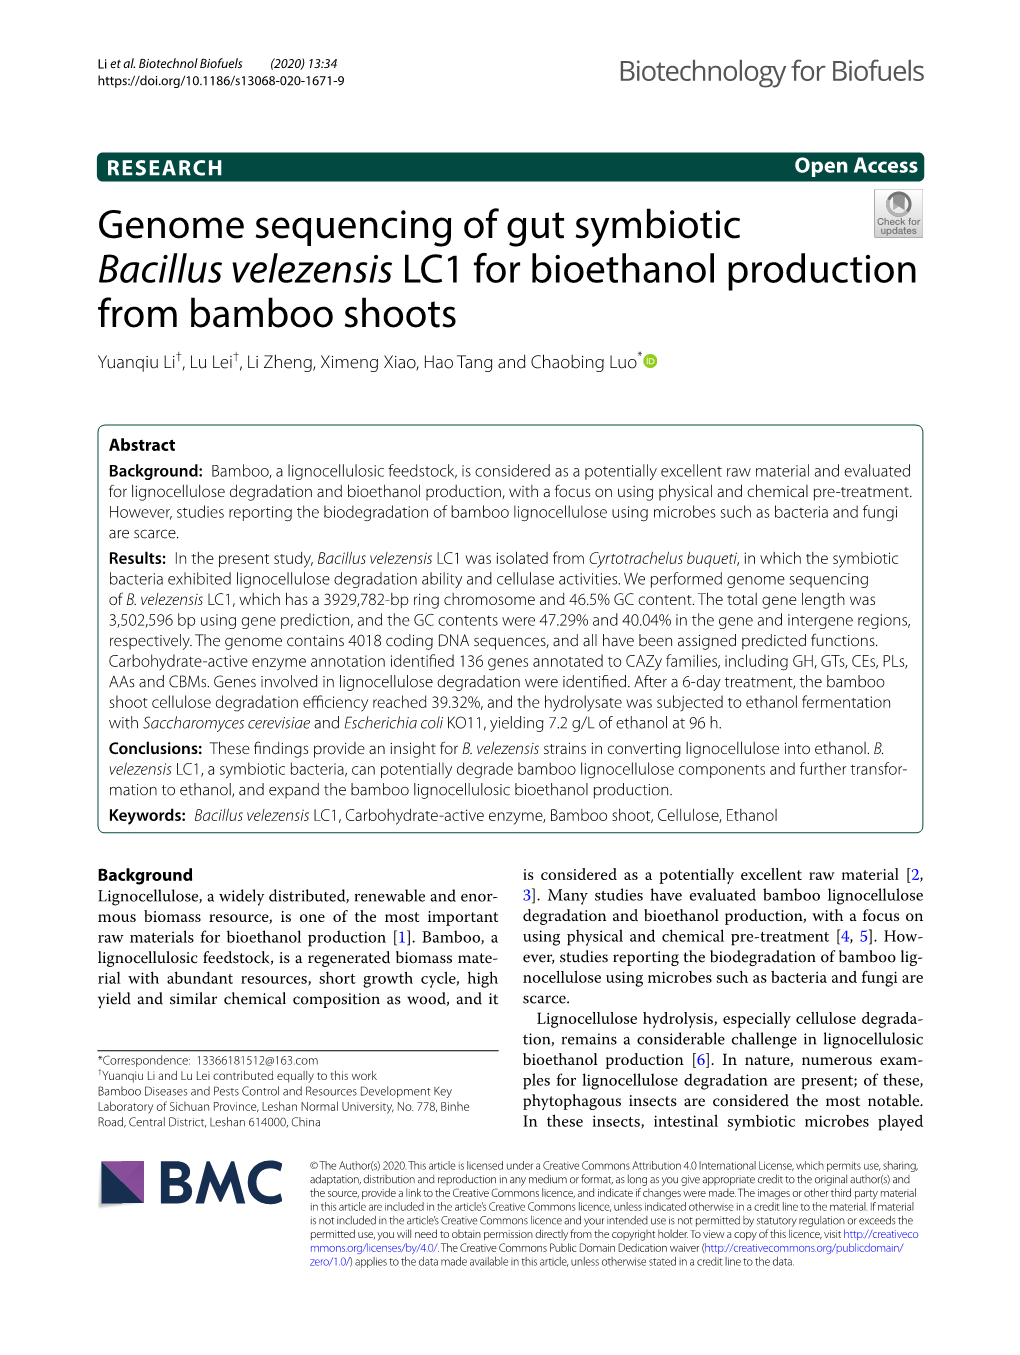 Genome Sequencing of Gut Symbiotic Bacillus Velezensis LC1 For